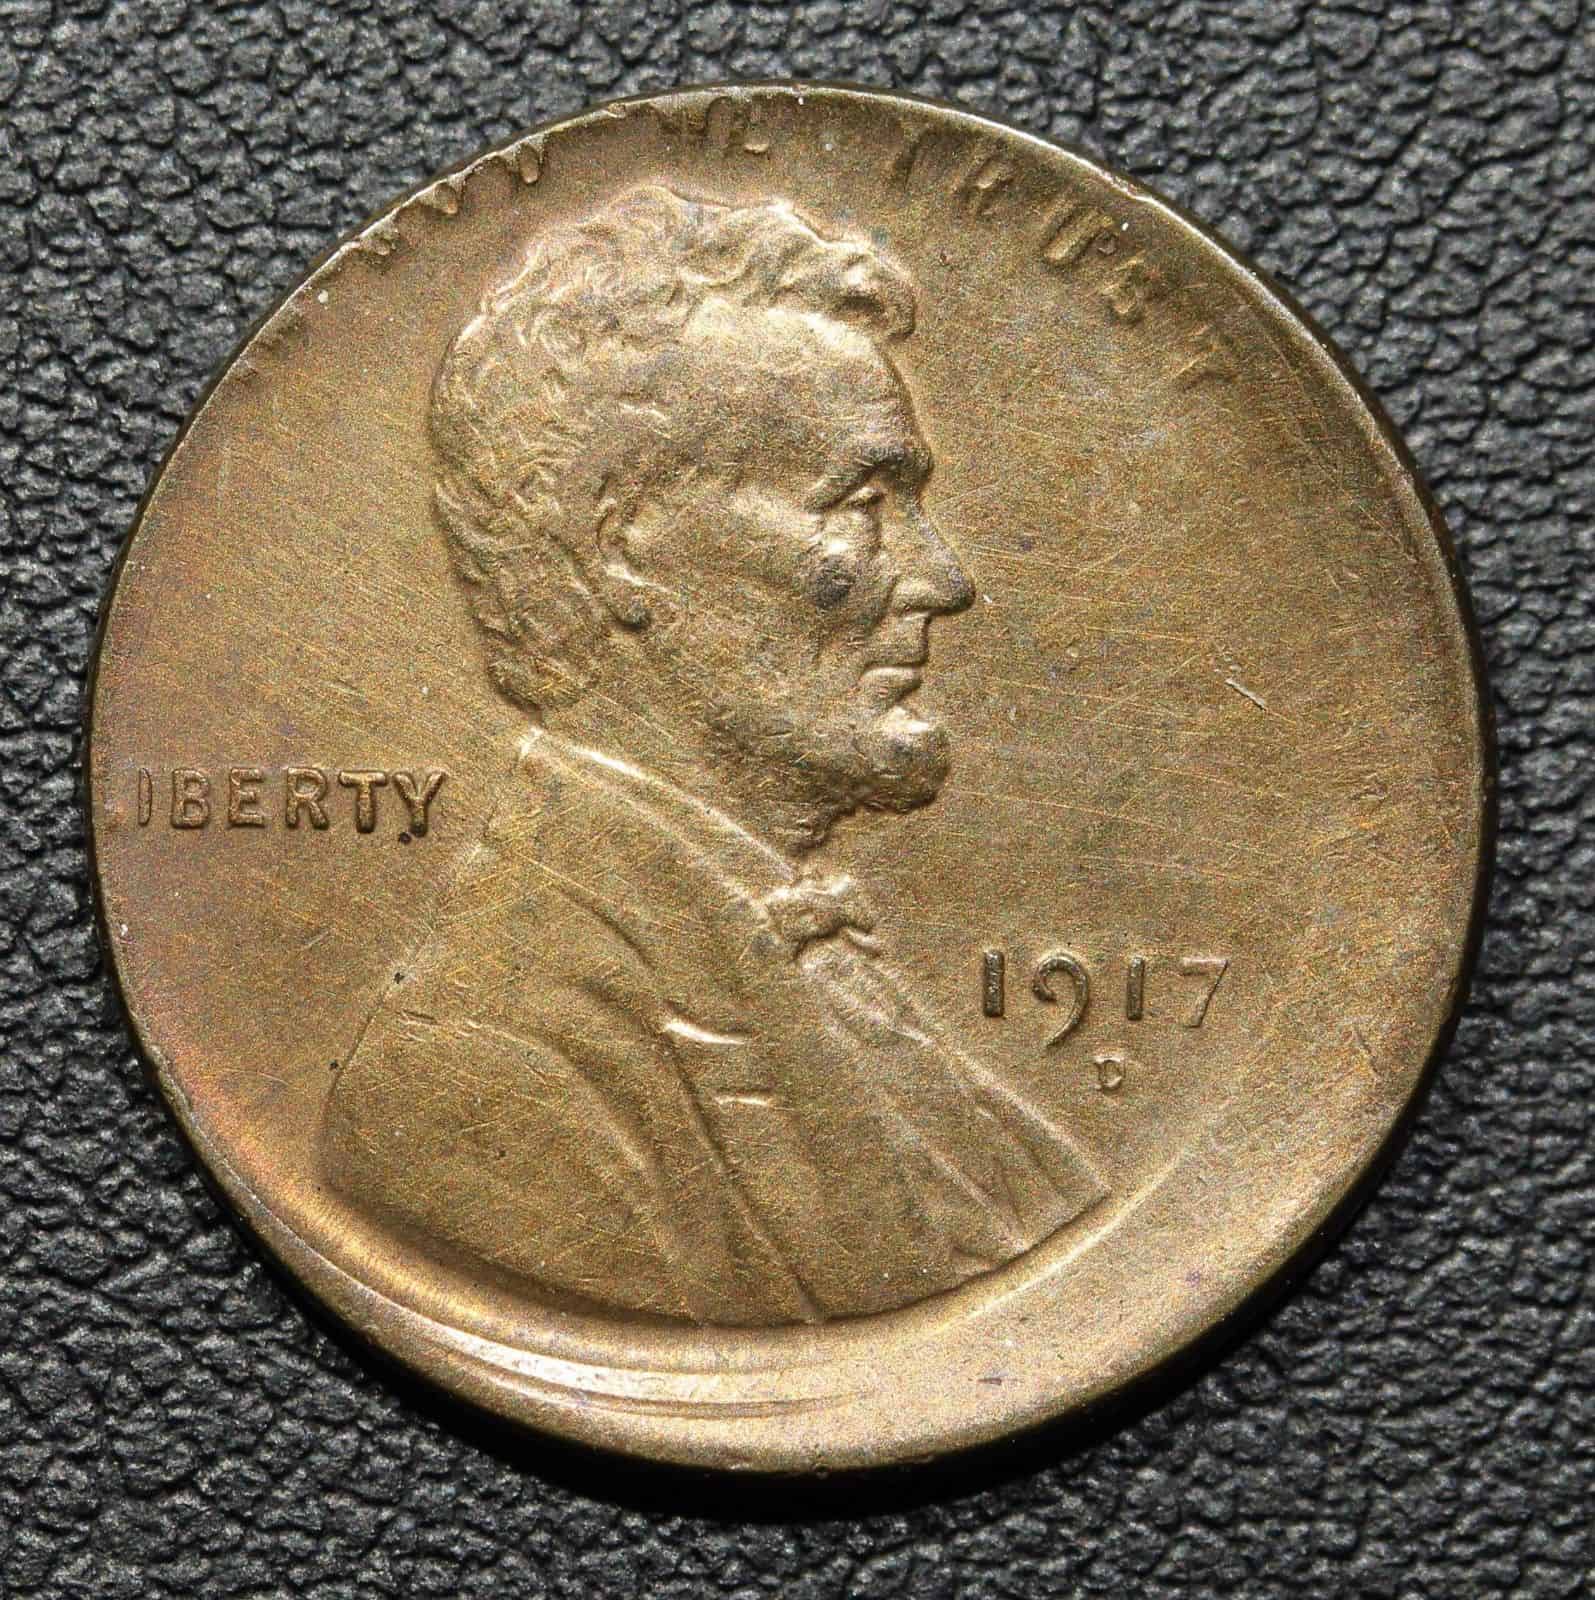 1917 off-center Lincoln penny